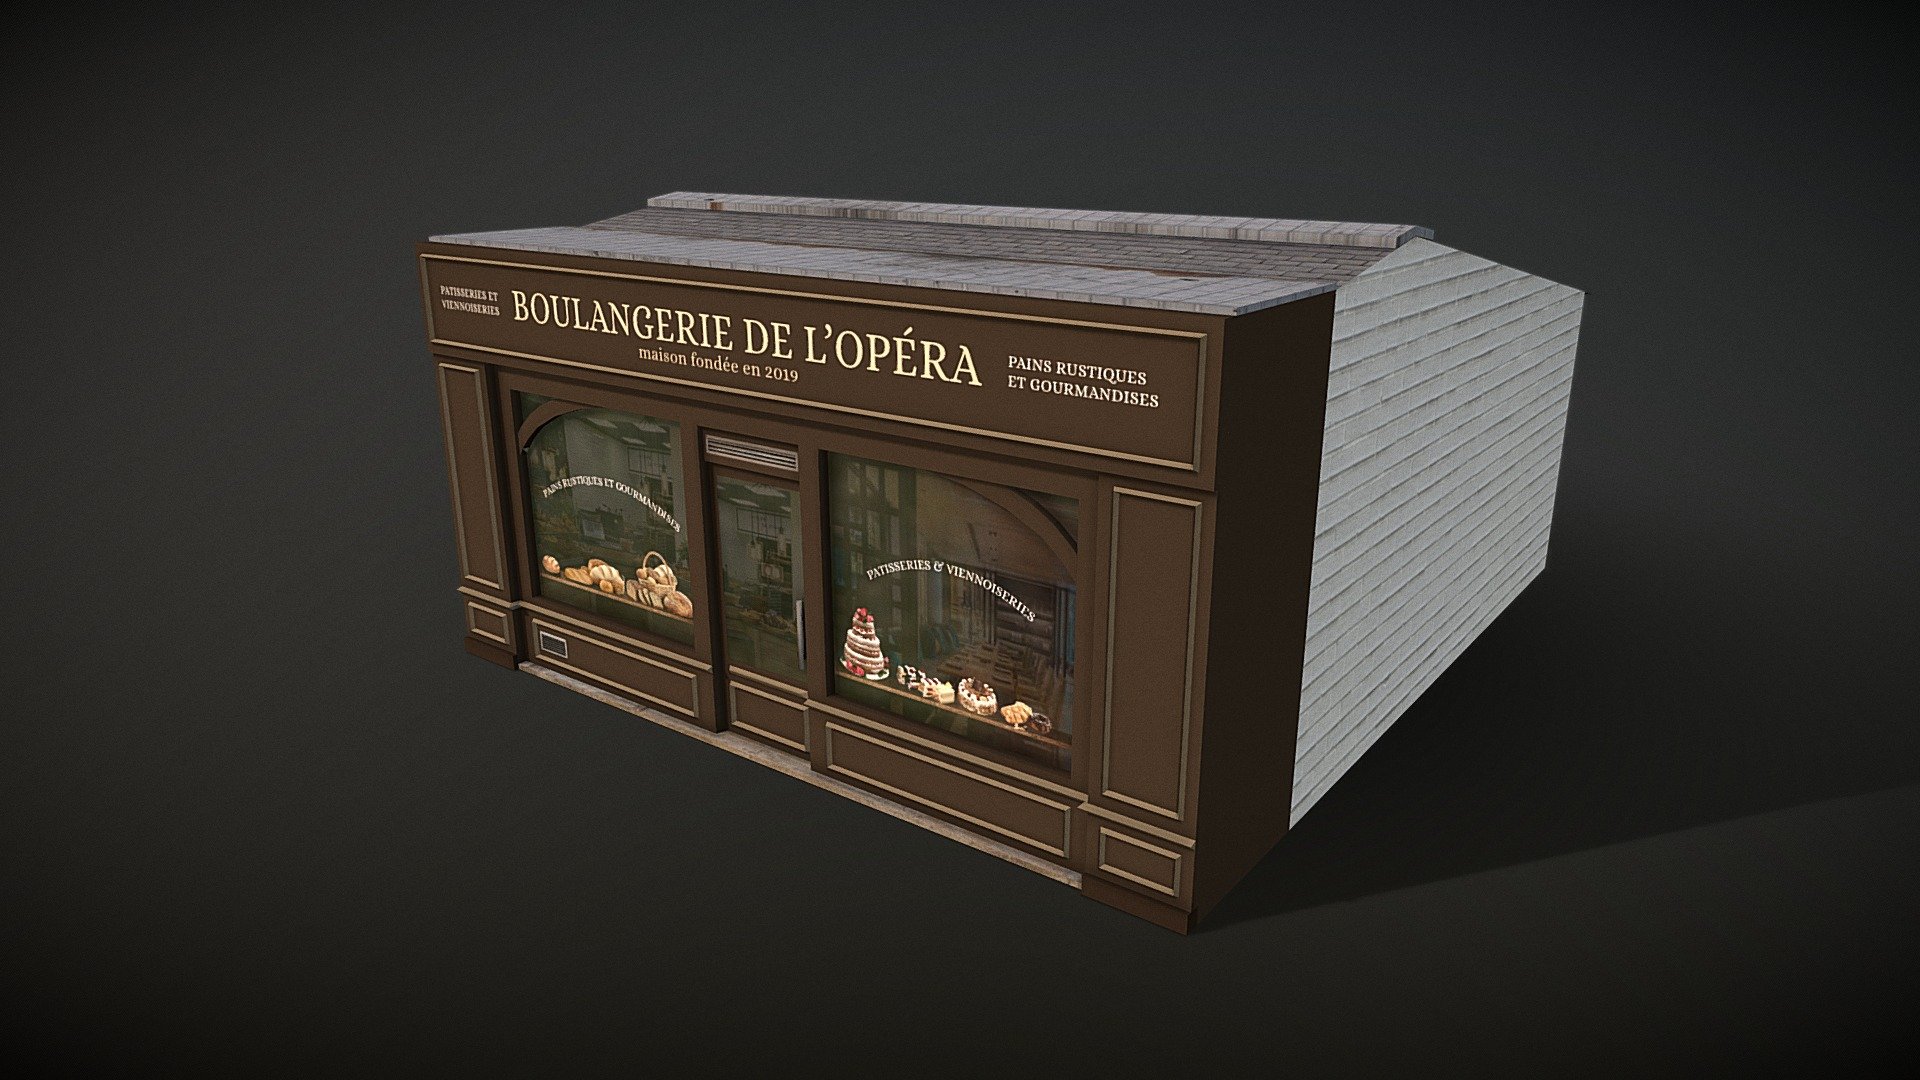 A typical french bakery

Asset for Cities: Skylines
https://steamcommunity.com/sharedfiles/filedetails/?id=1897836201 - Boulangerie de l'Opéra - Buy Royalty Free 3D model by Gruny (@grunystudio) 3d model